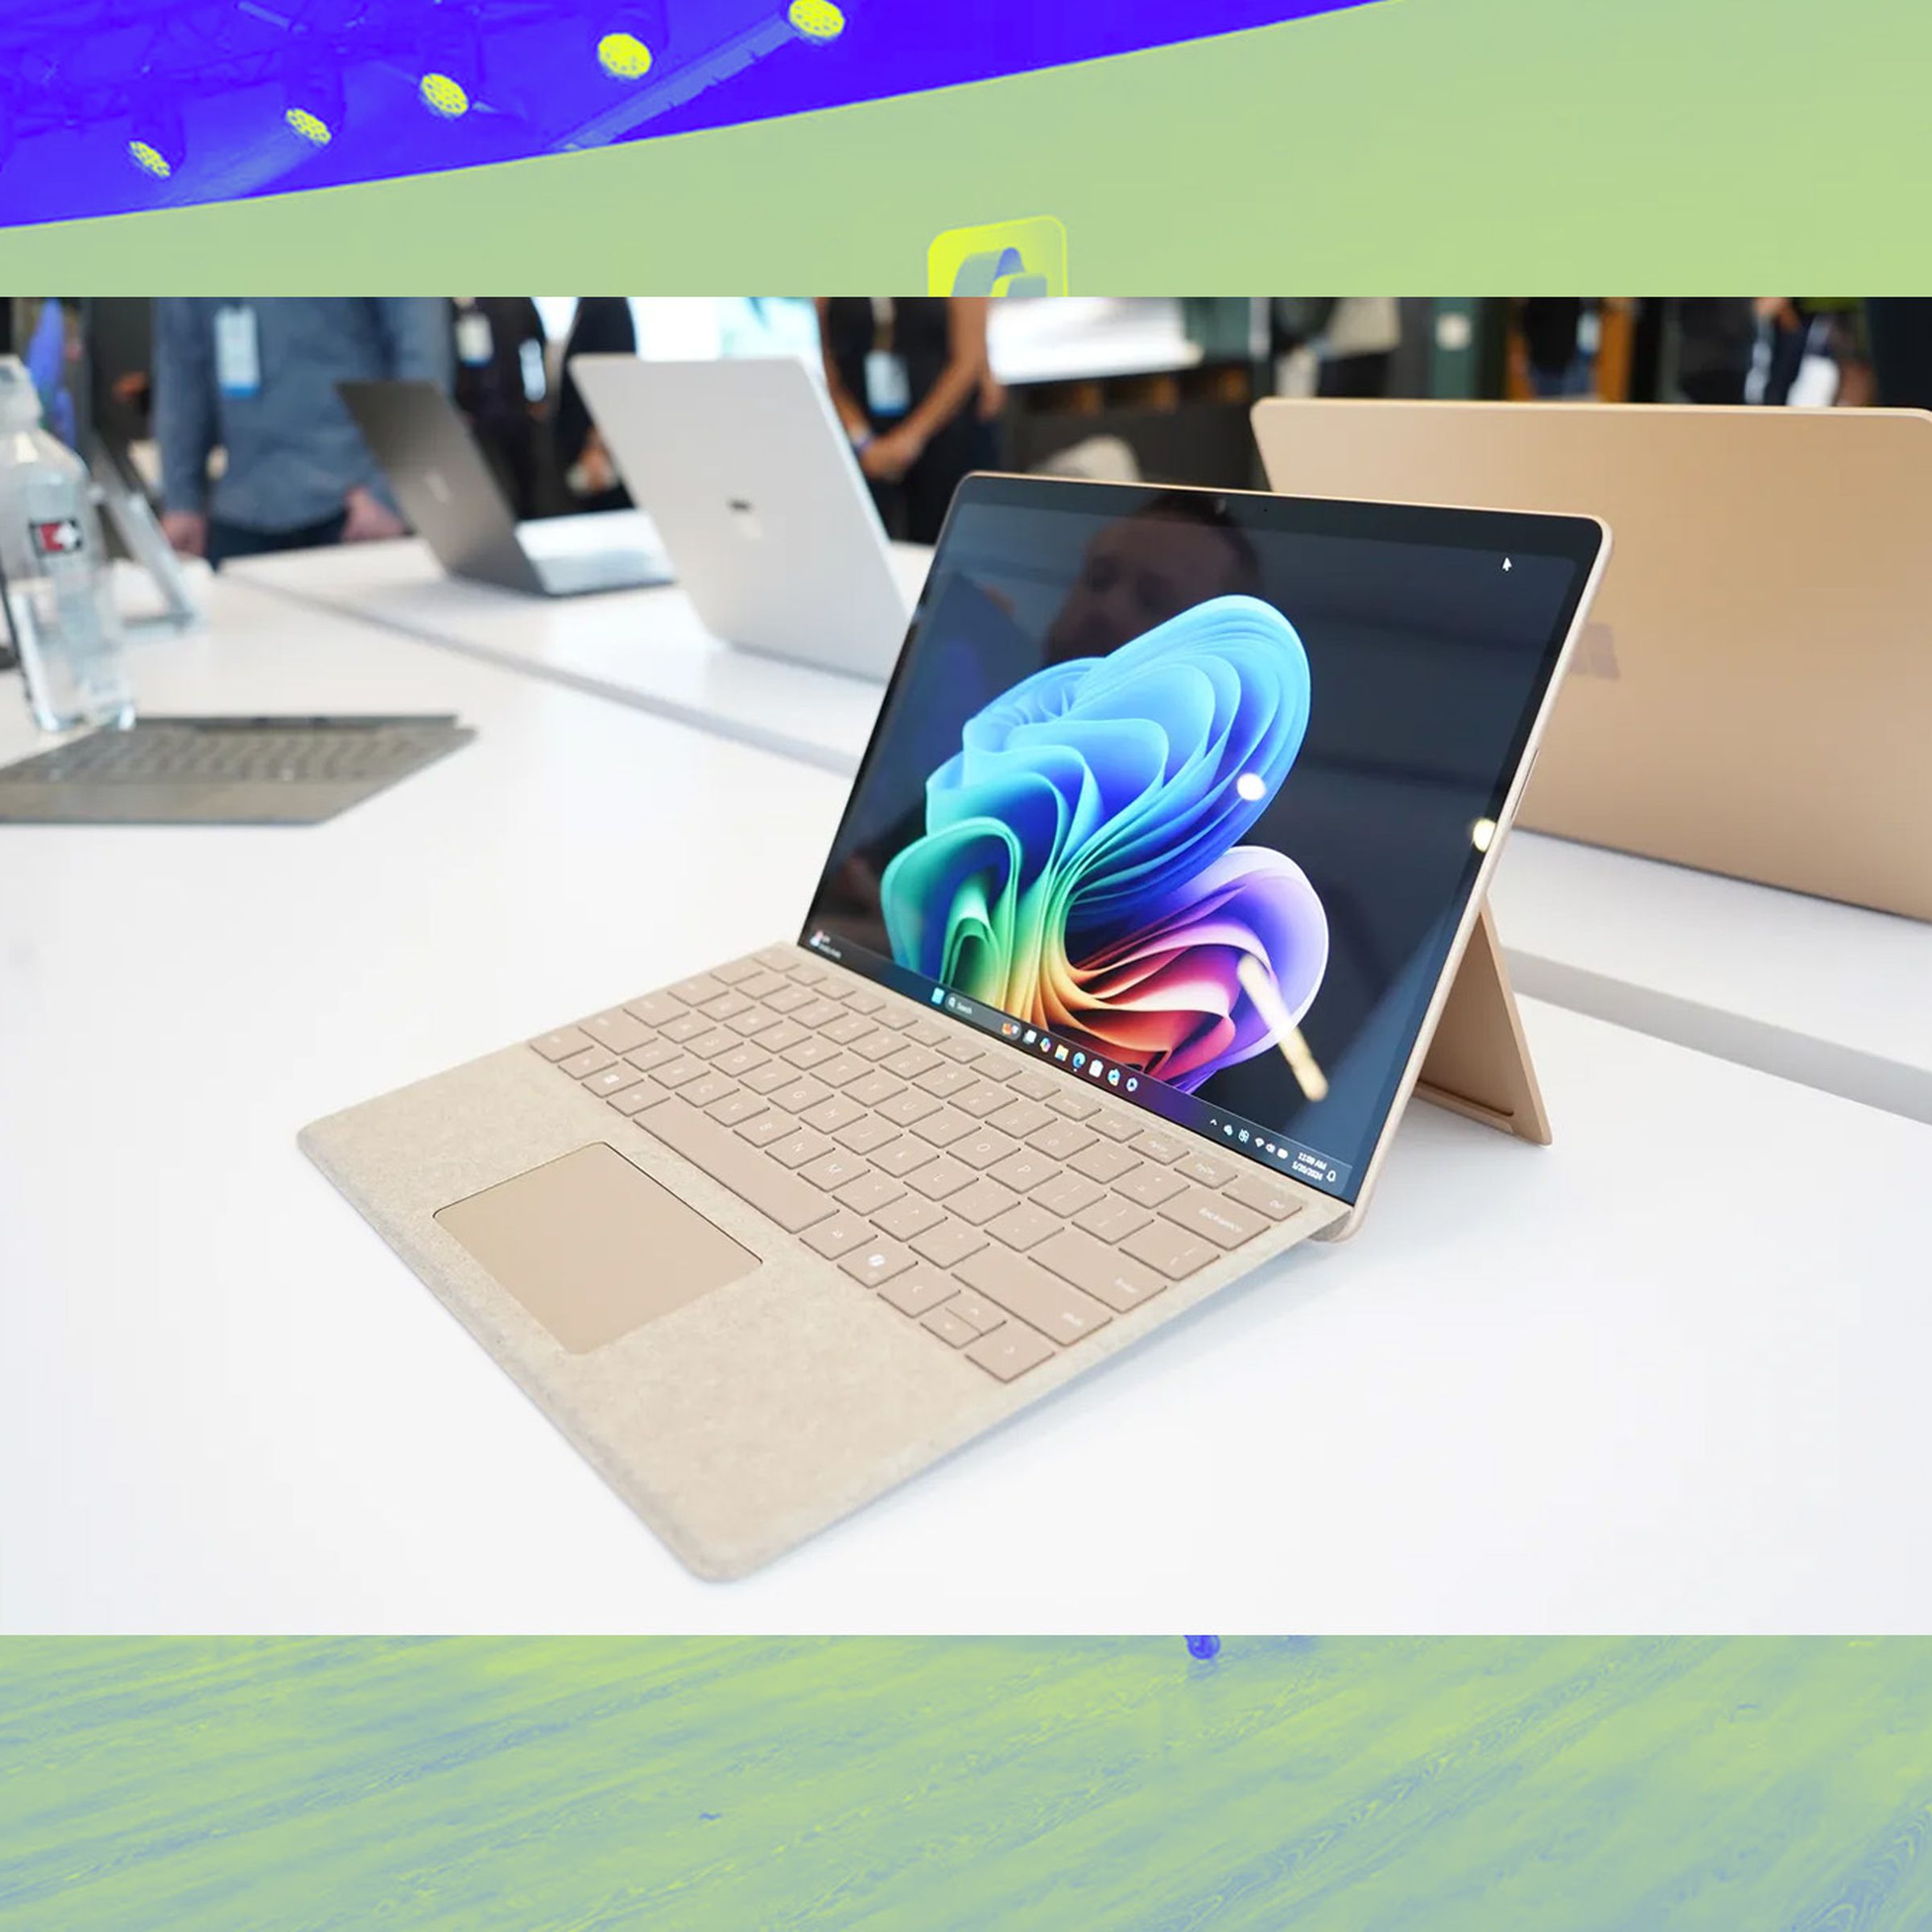 A photo of the Surface Laptop, on top of a Vergecast illustration.